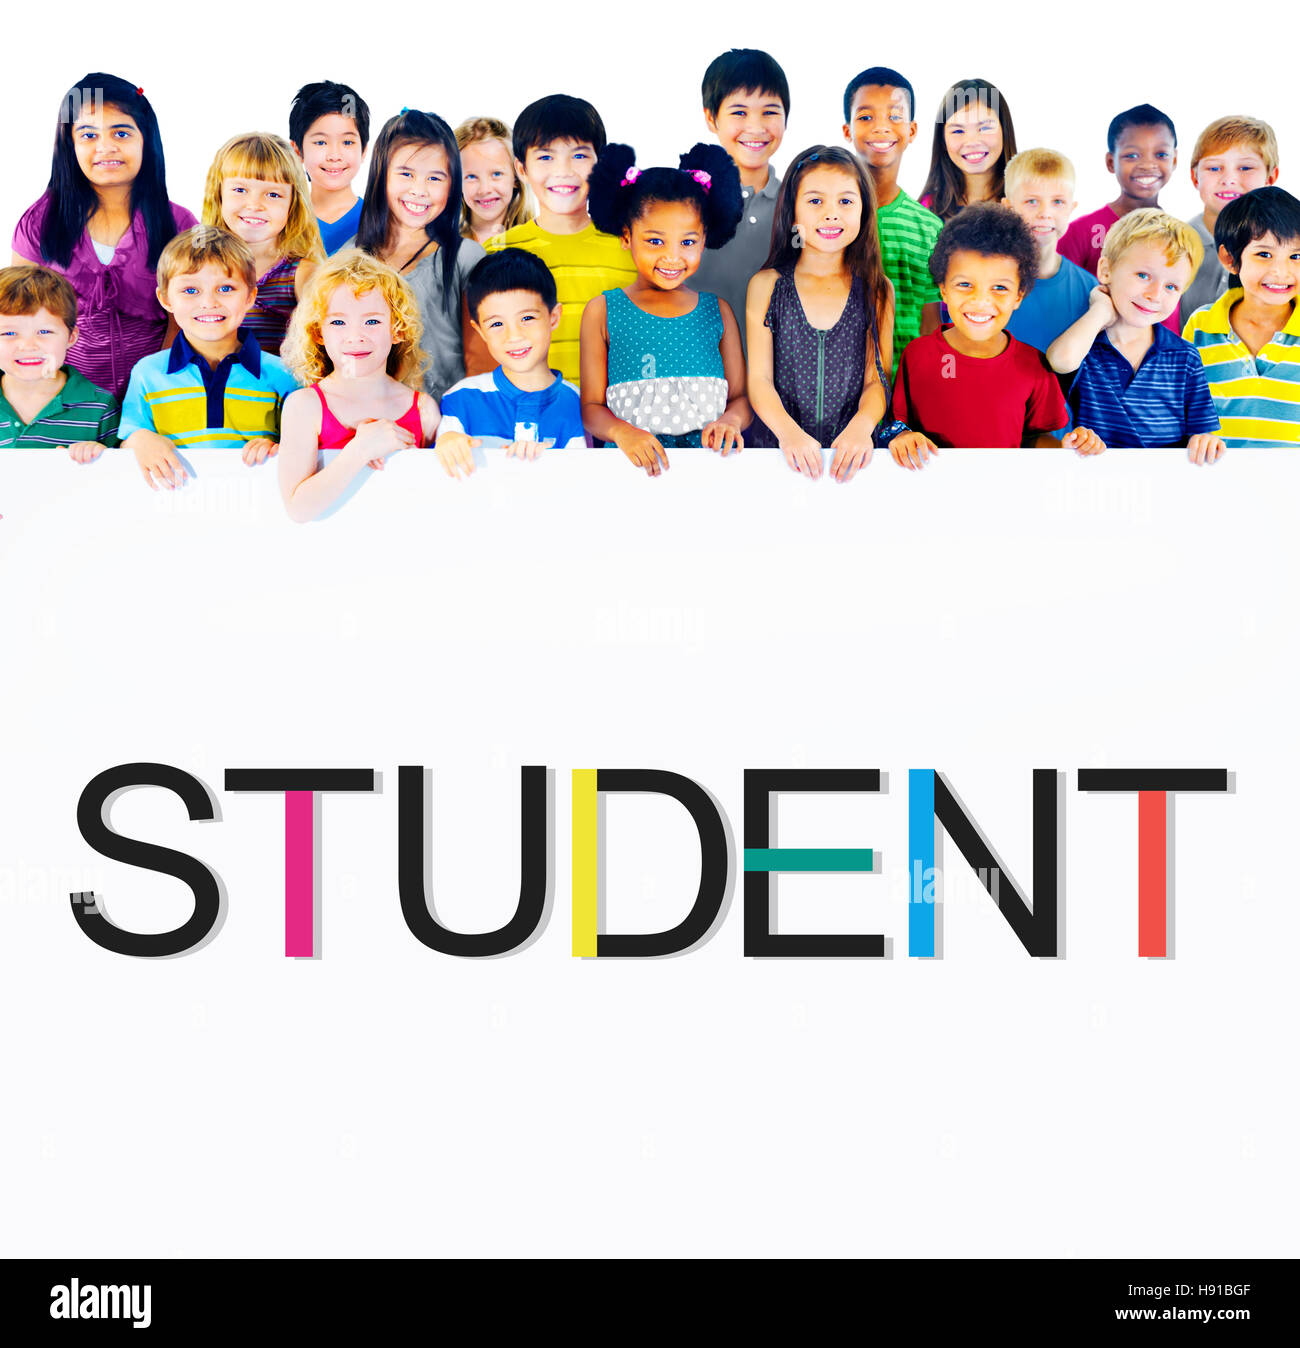 Student School Learning Intern Education Concept Stock Photo